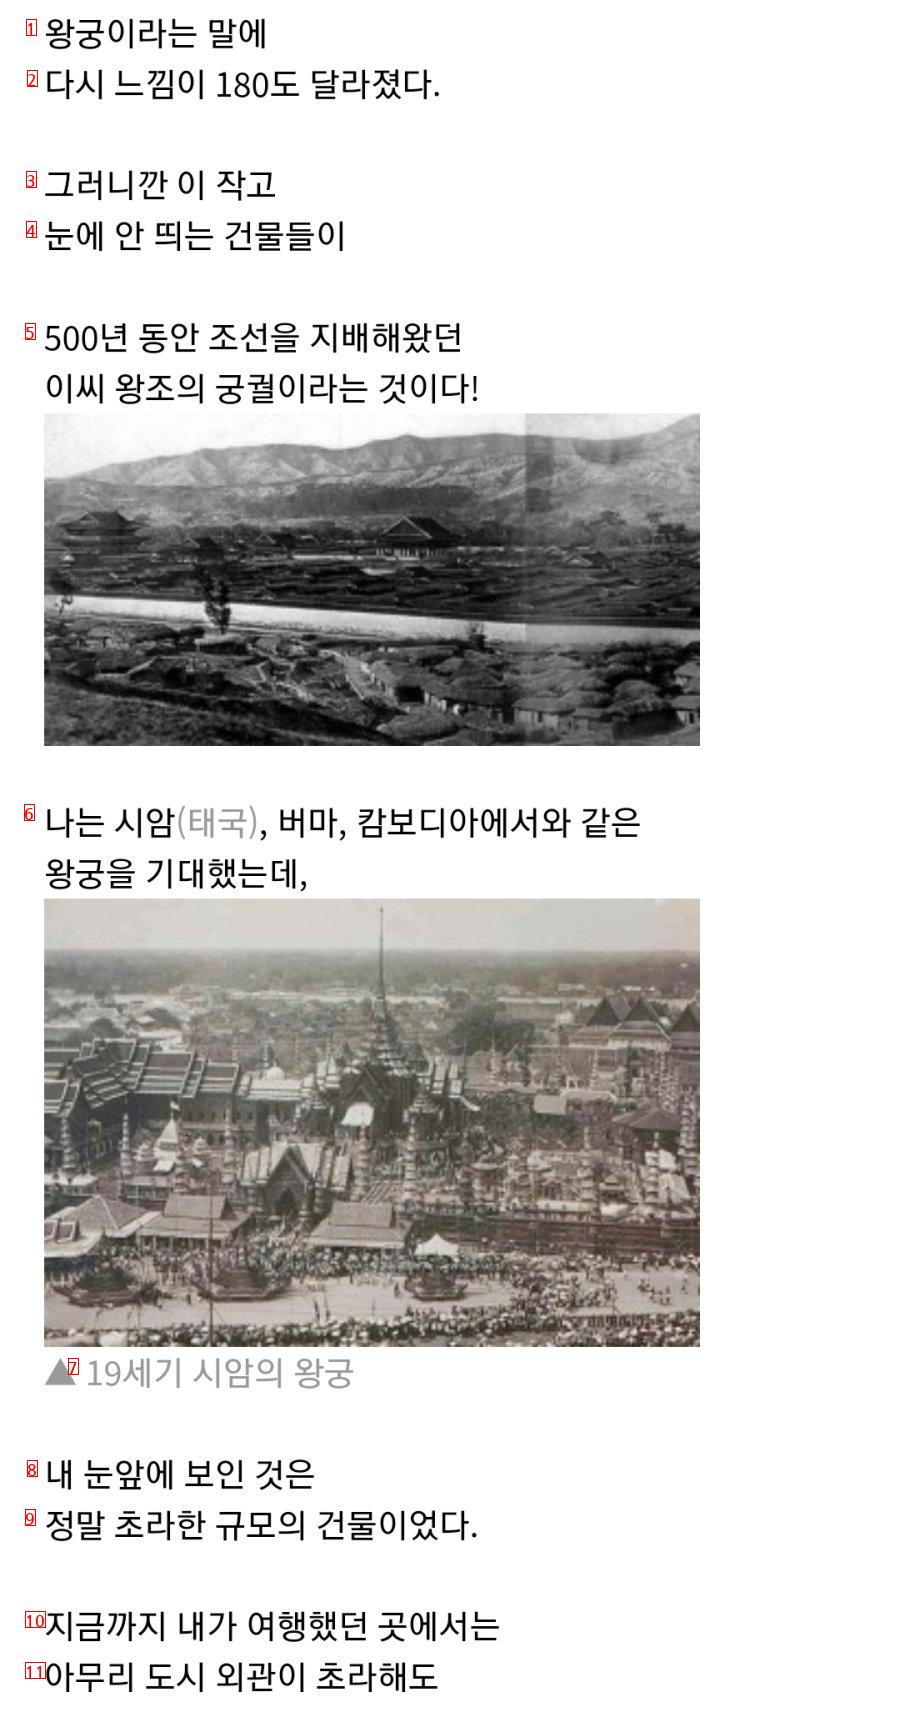 the shocking reality of the late Joseon Dynasty